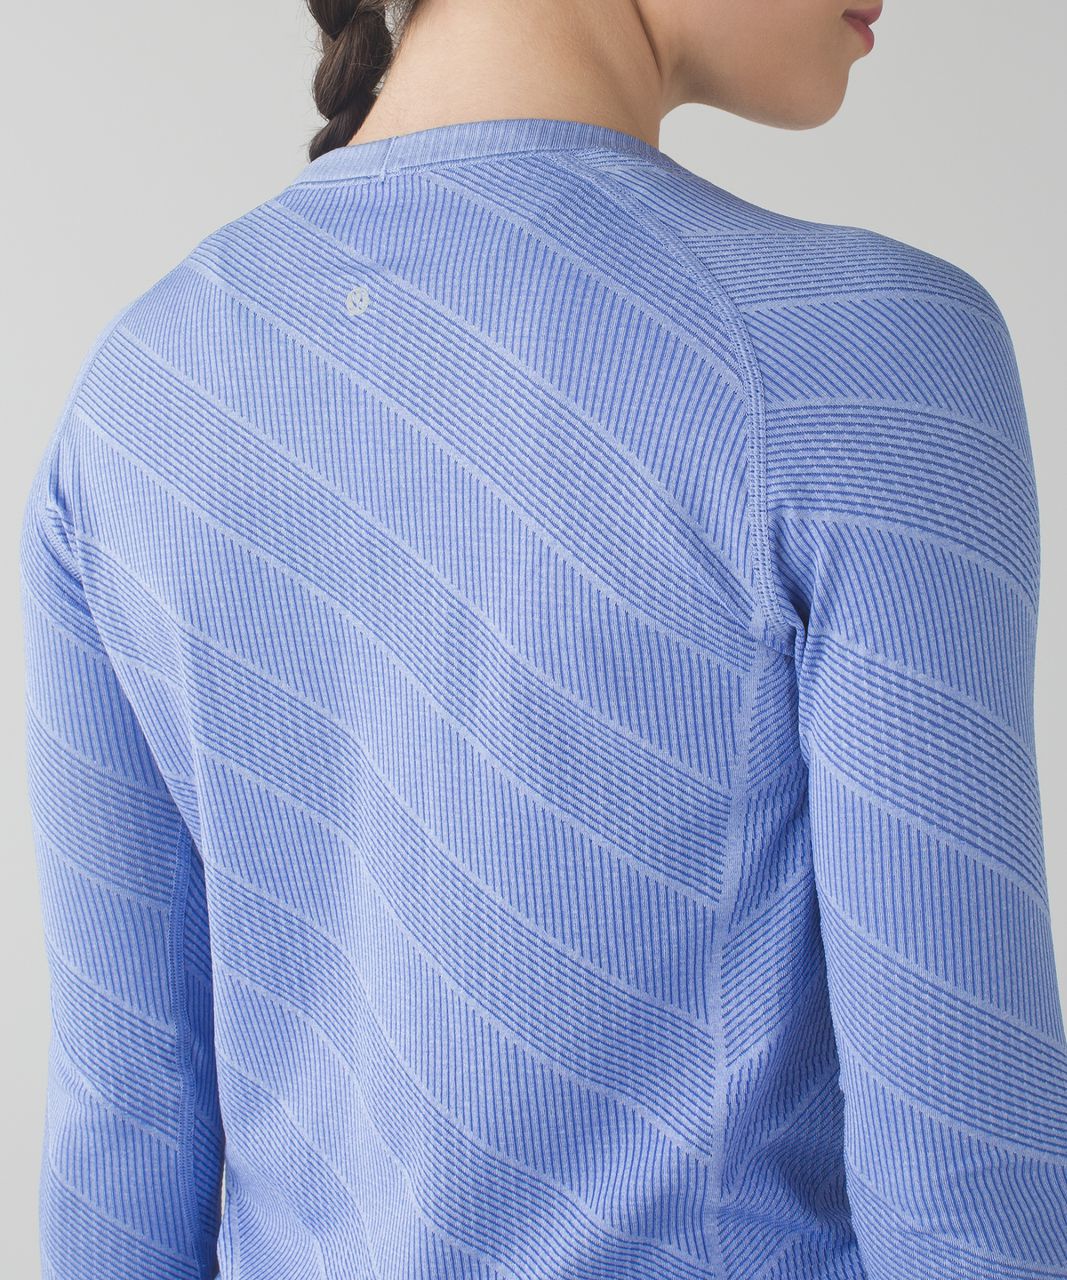 Lululemon Swiftly Tech Long Sleeve Crew - Heathered Lullaby (First Release)